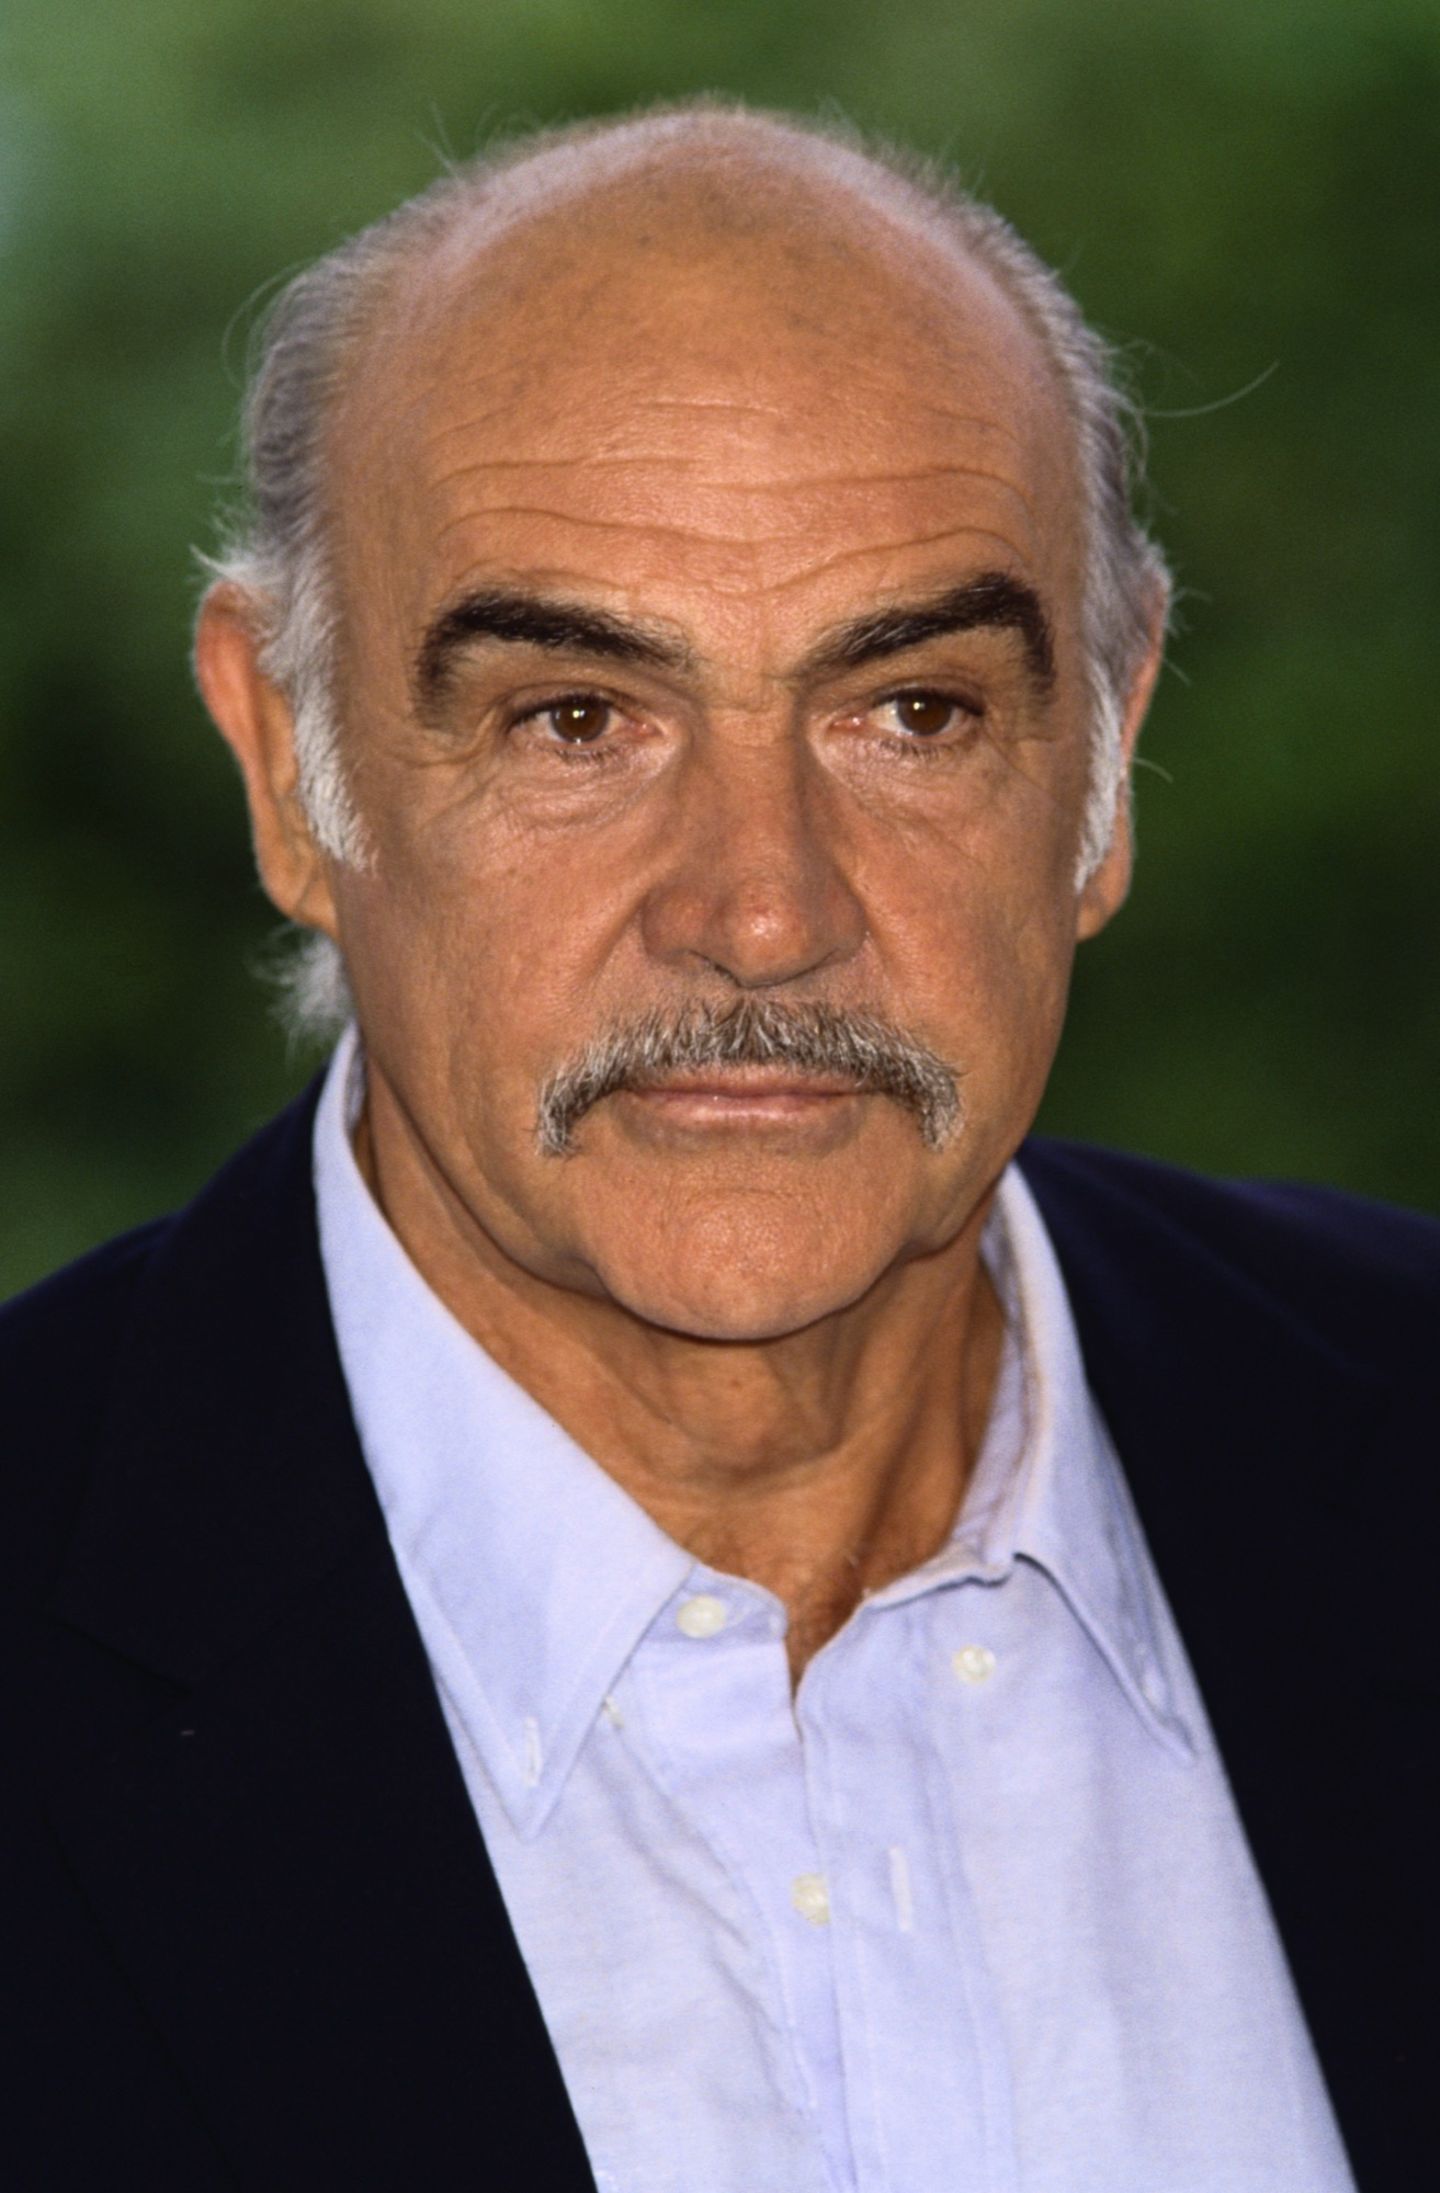 Sexiest Man Alive 1989 - Sean Connery